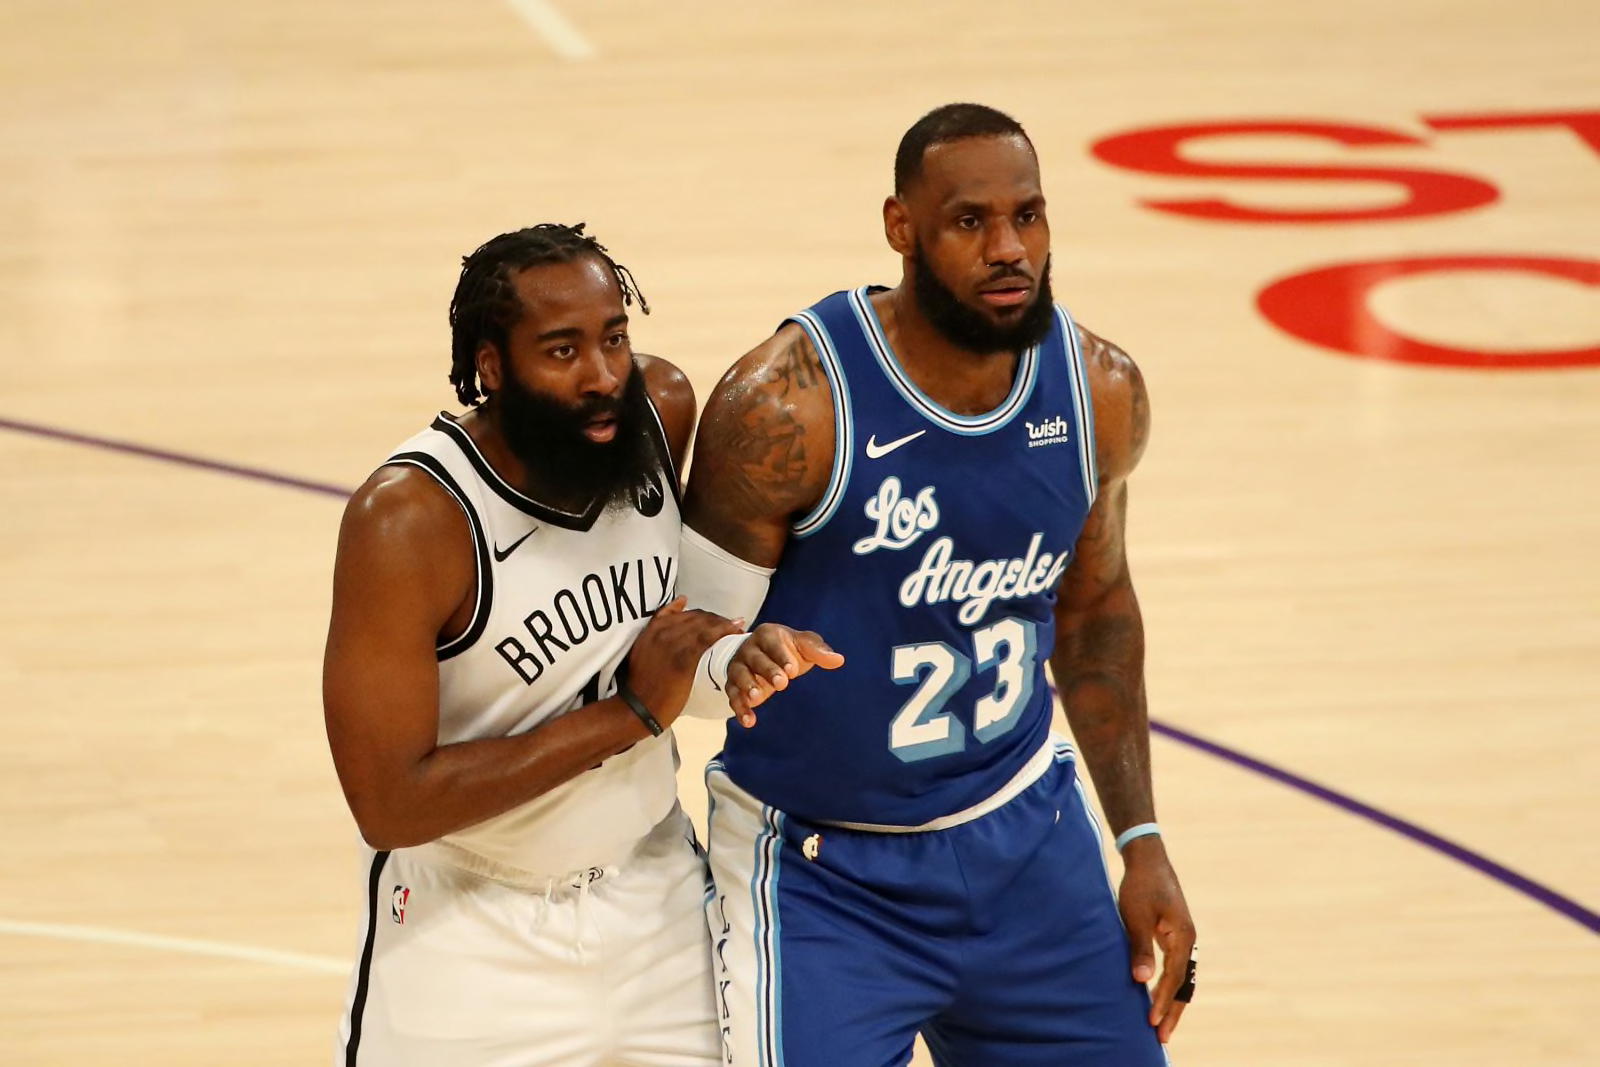 LeBron clowns Durant for Harden trade at 2022 NBA All-Star Draft